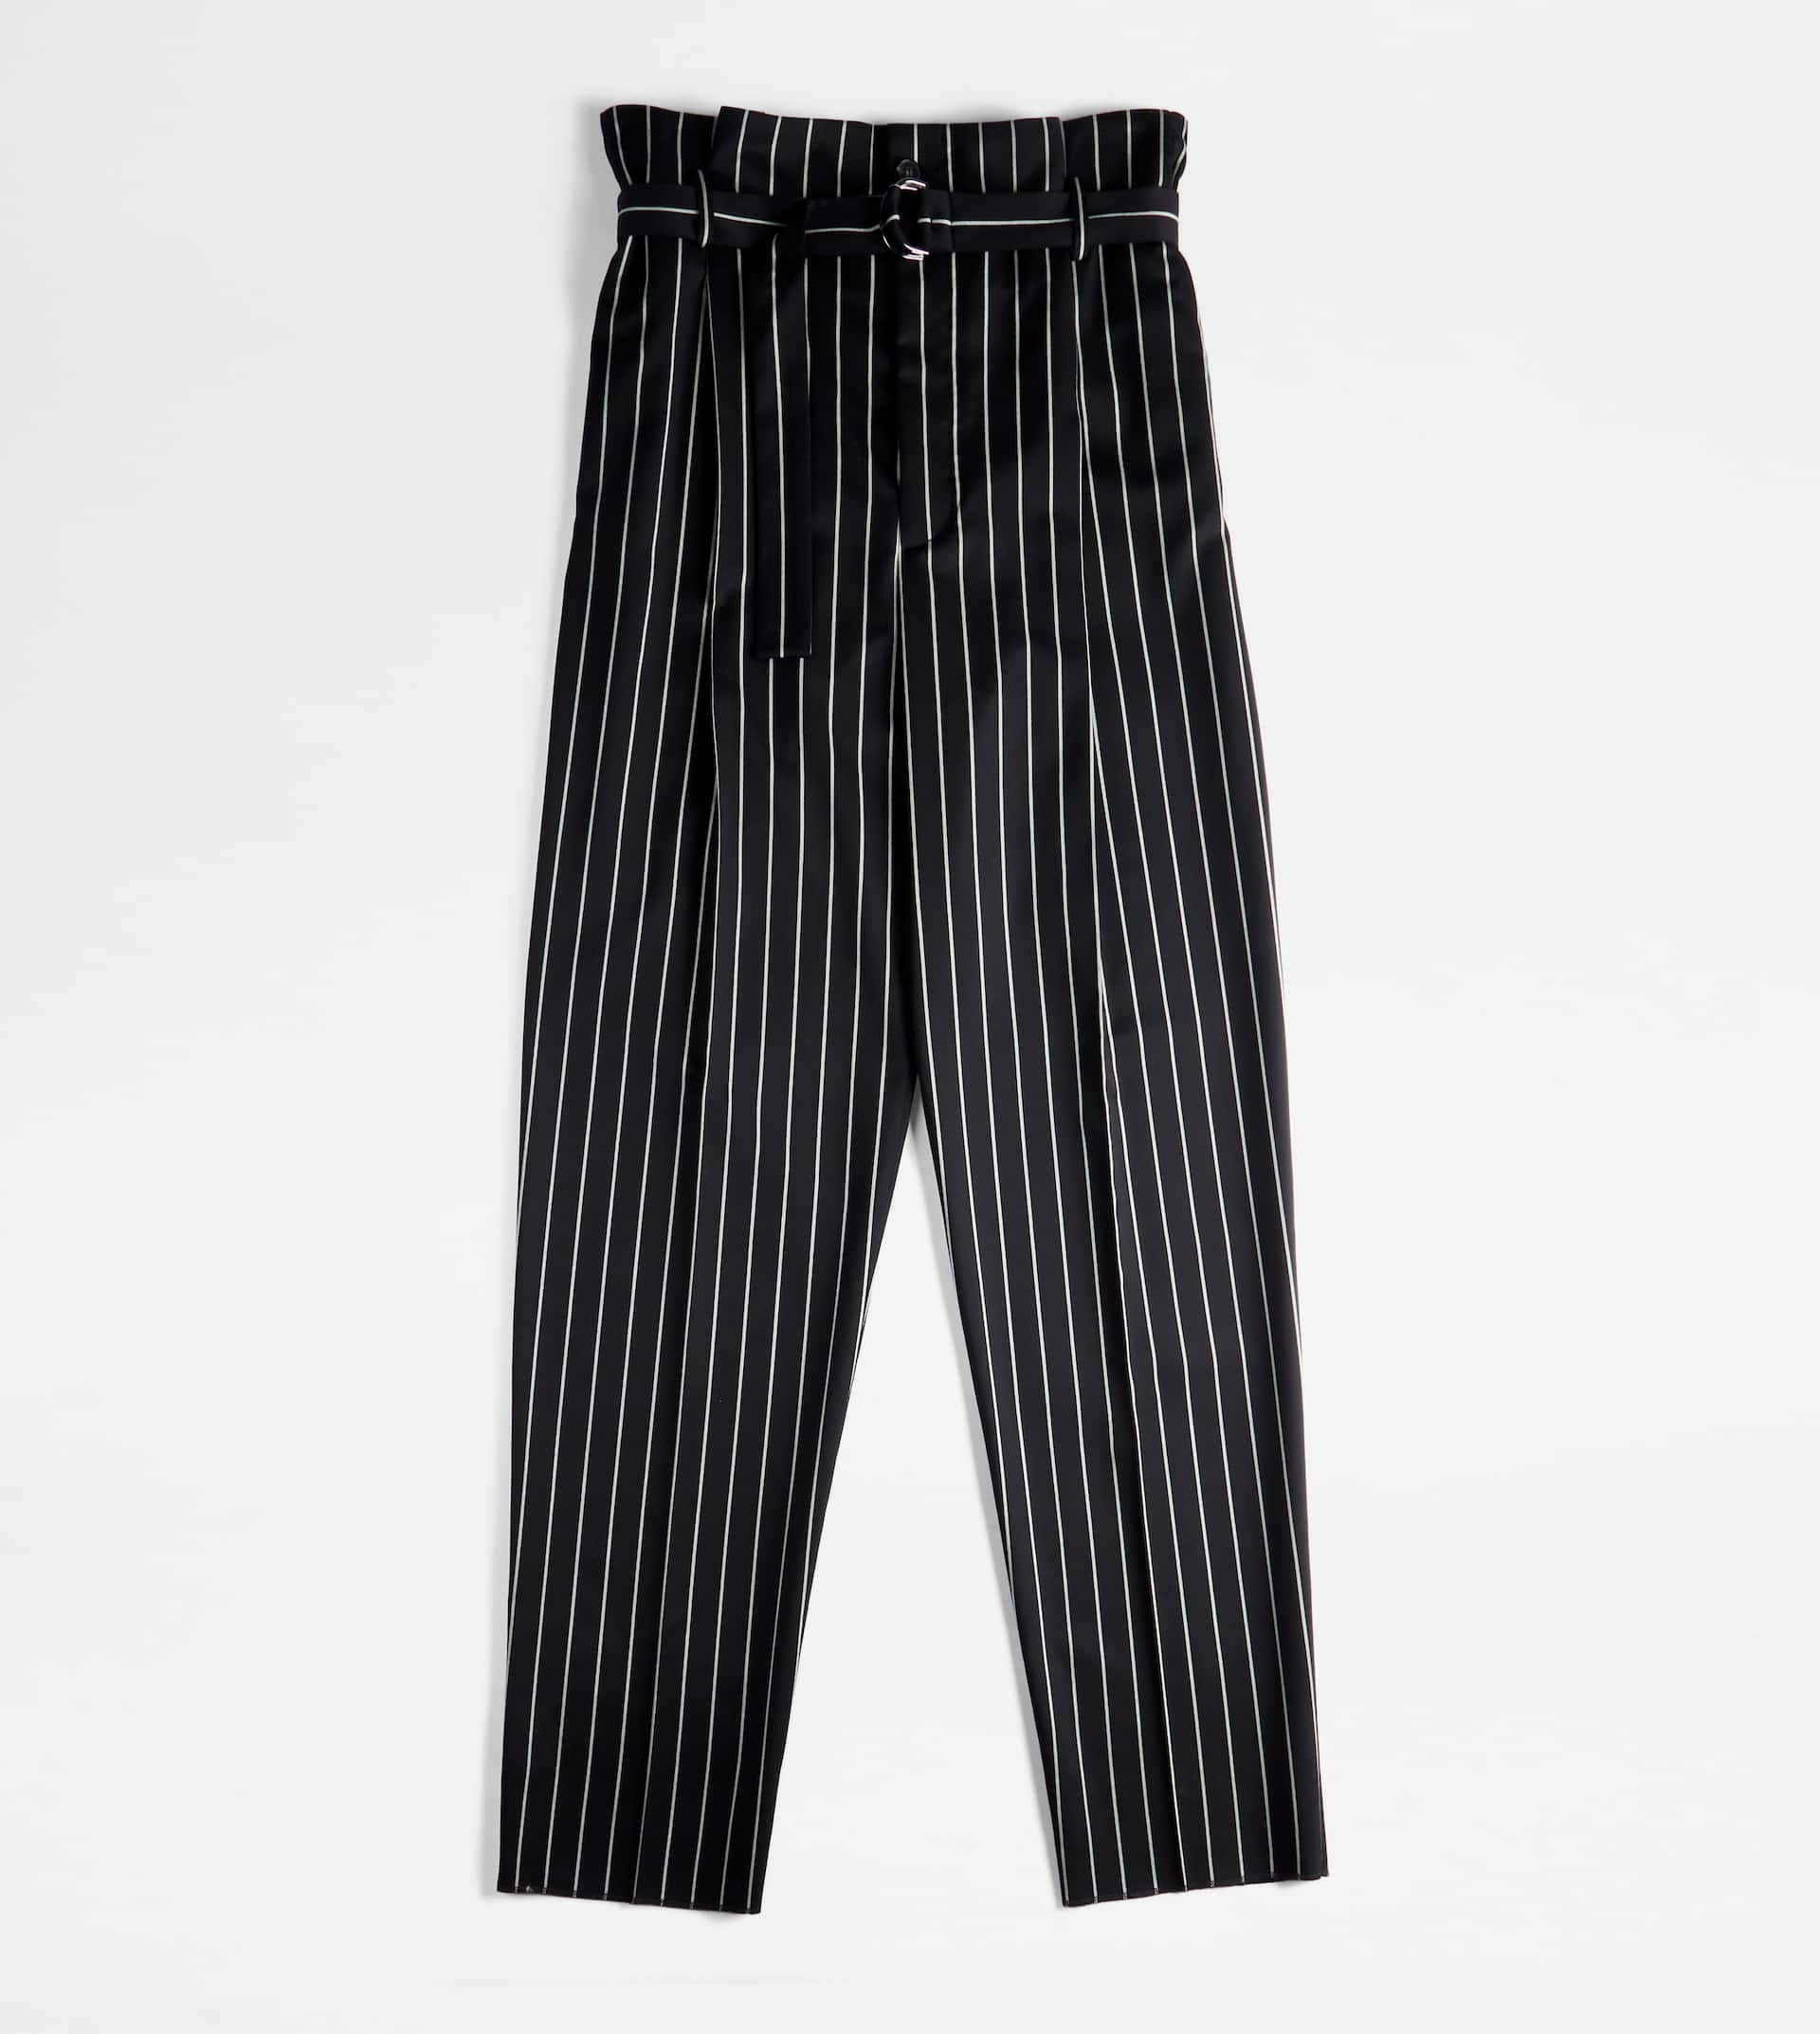 PANTS IN STRETCH WOOL WITH DARTS - WHITE, BLACK - 1